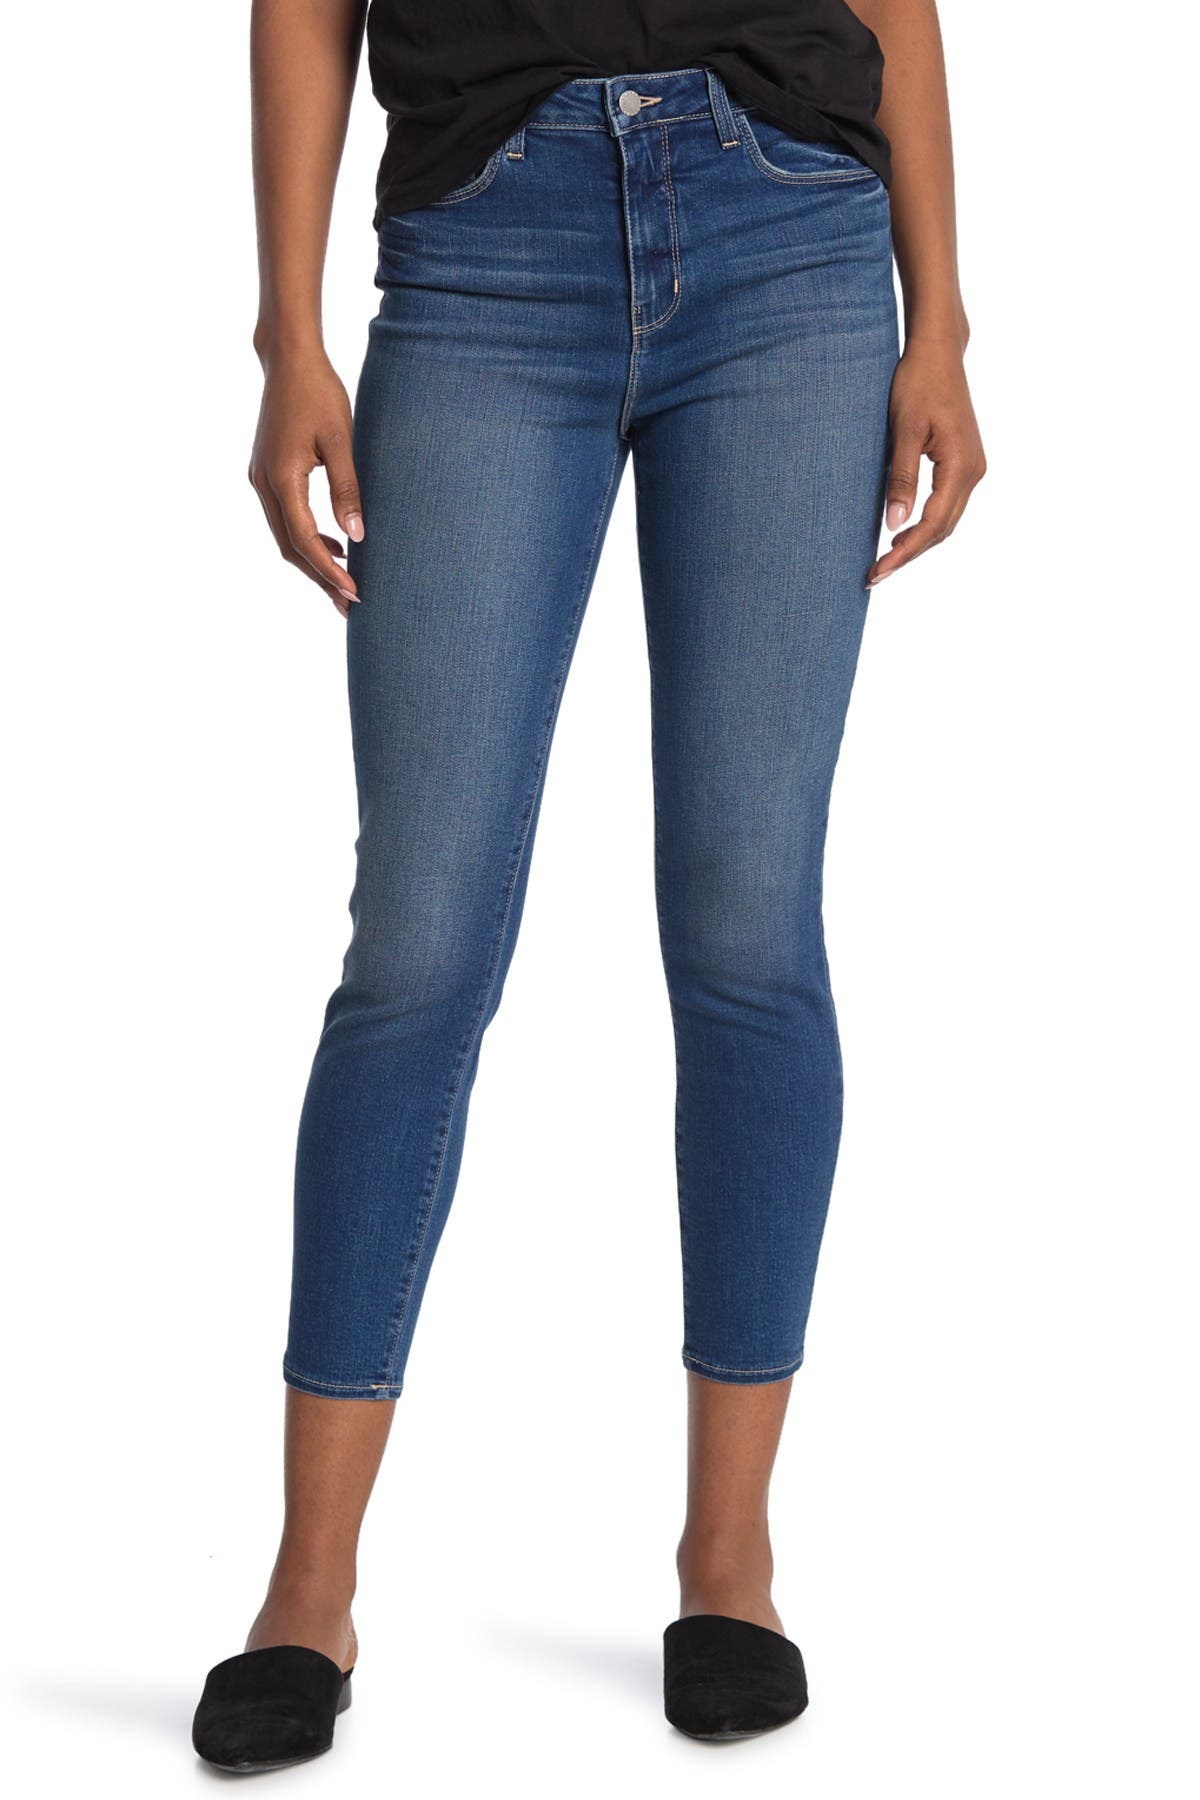 L Agence Margo High Rise Ankle Crop Skinny Jeans In Dark Blue4